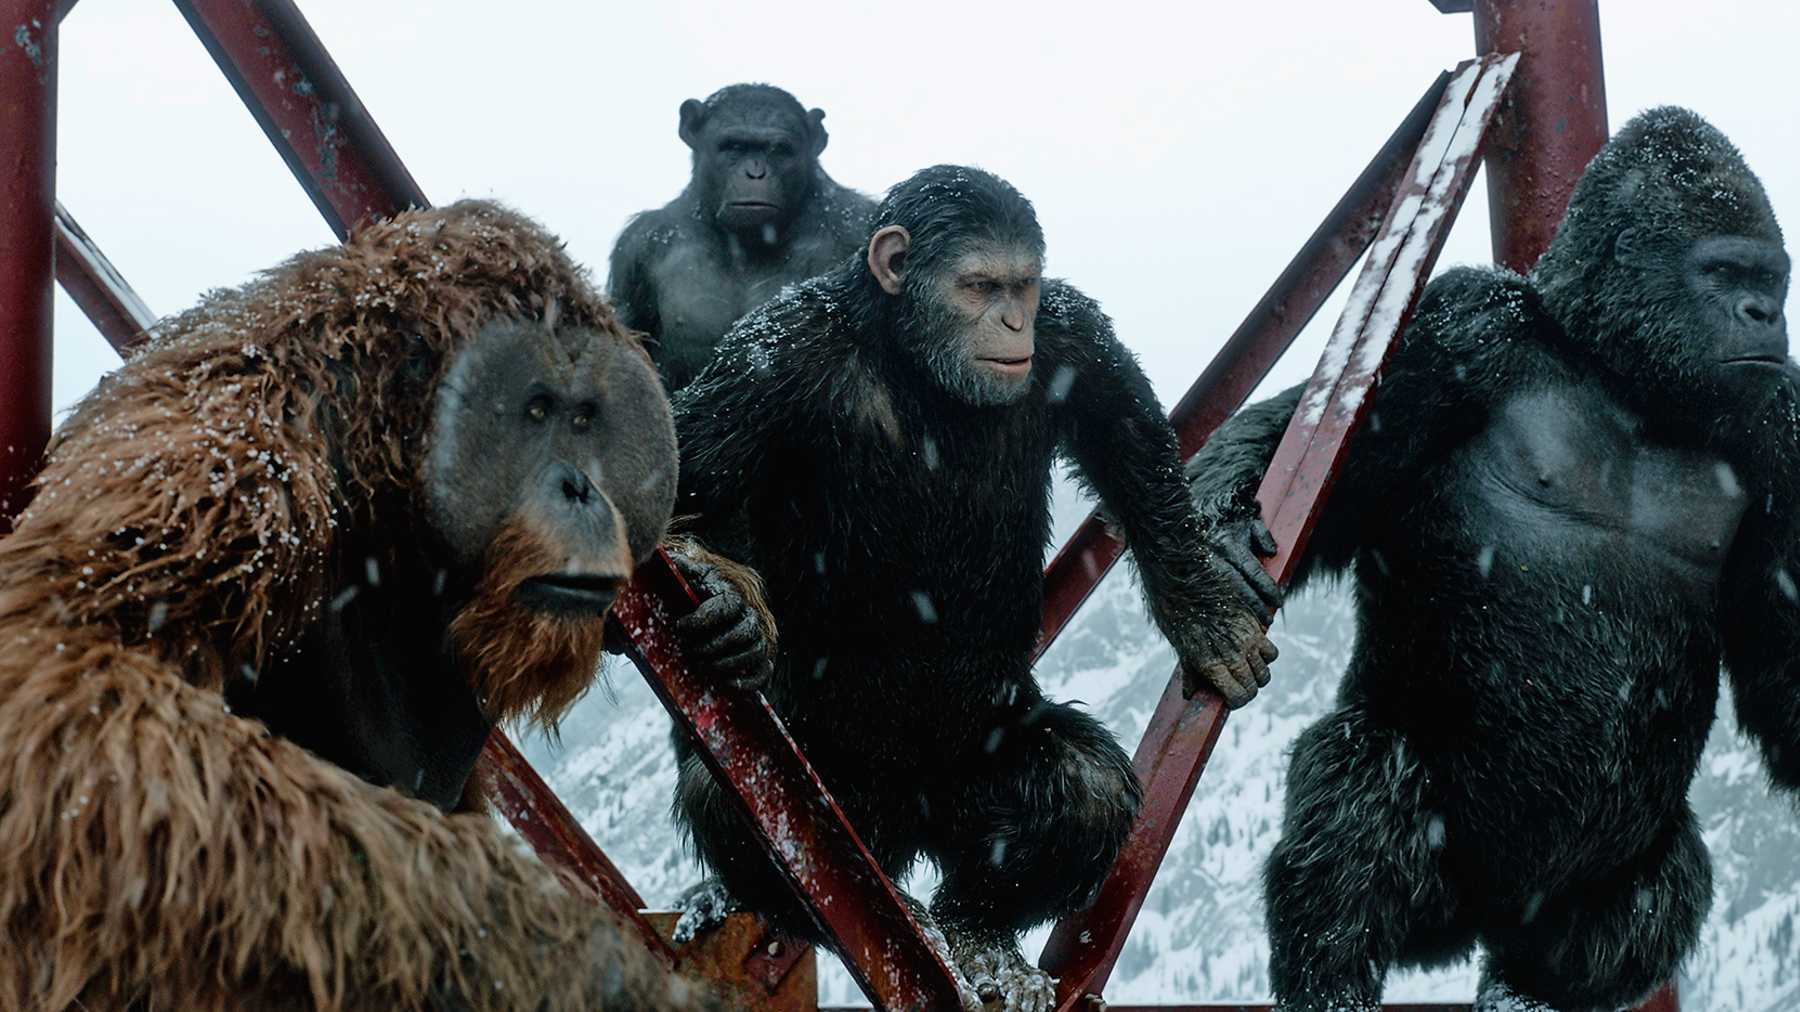 Worried The New Planet Of The Apes Movie Will Ruin The Prequel Trilogy? Don’t Be